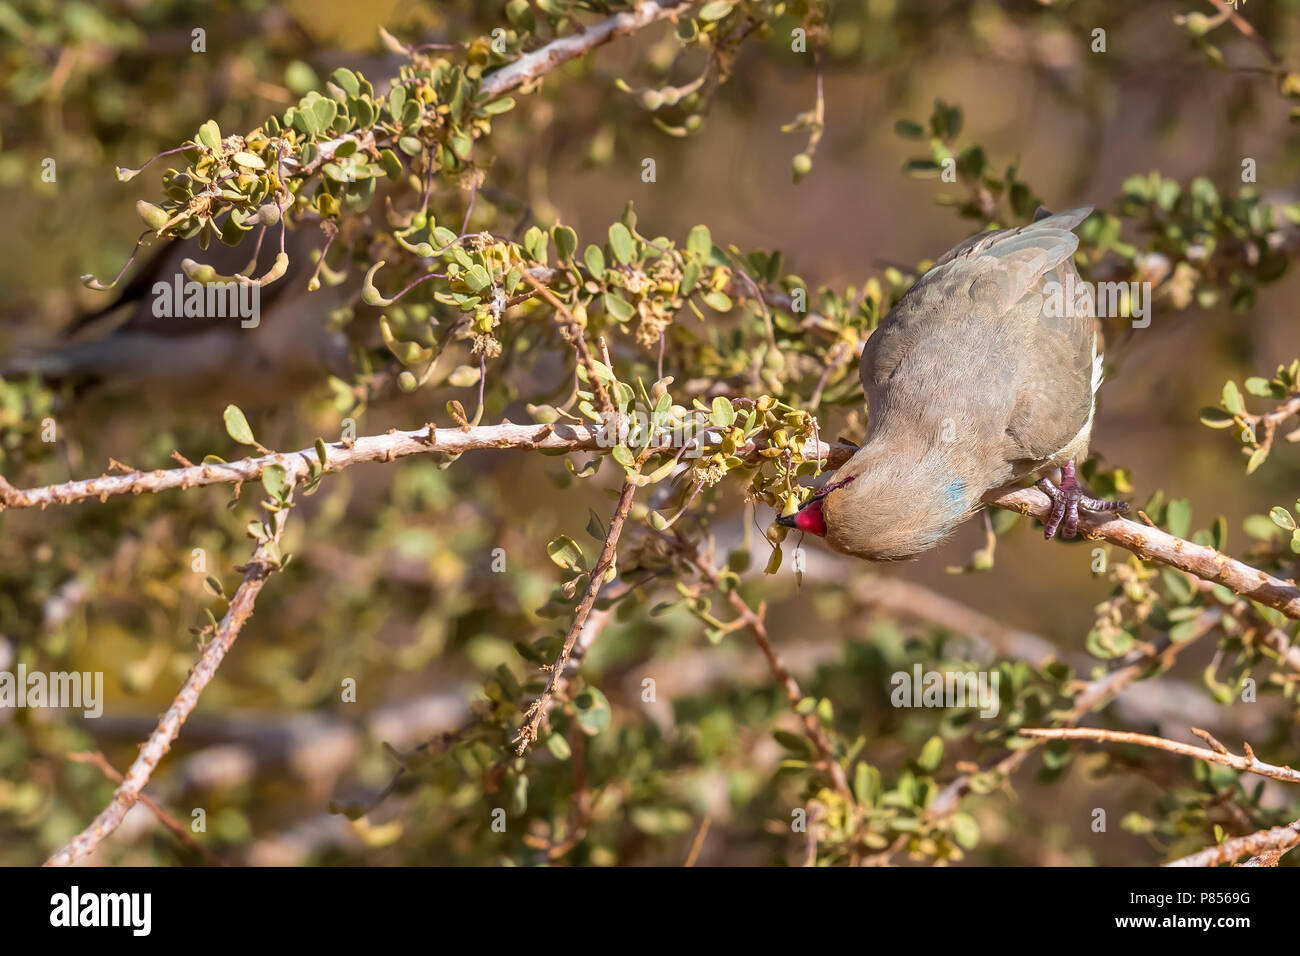 Adult Blue-naped Mousebird perched on a dense bush in Toujounine oasis, Adar, Mauritania. April 04, 2018. Stock Photo